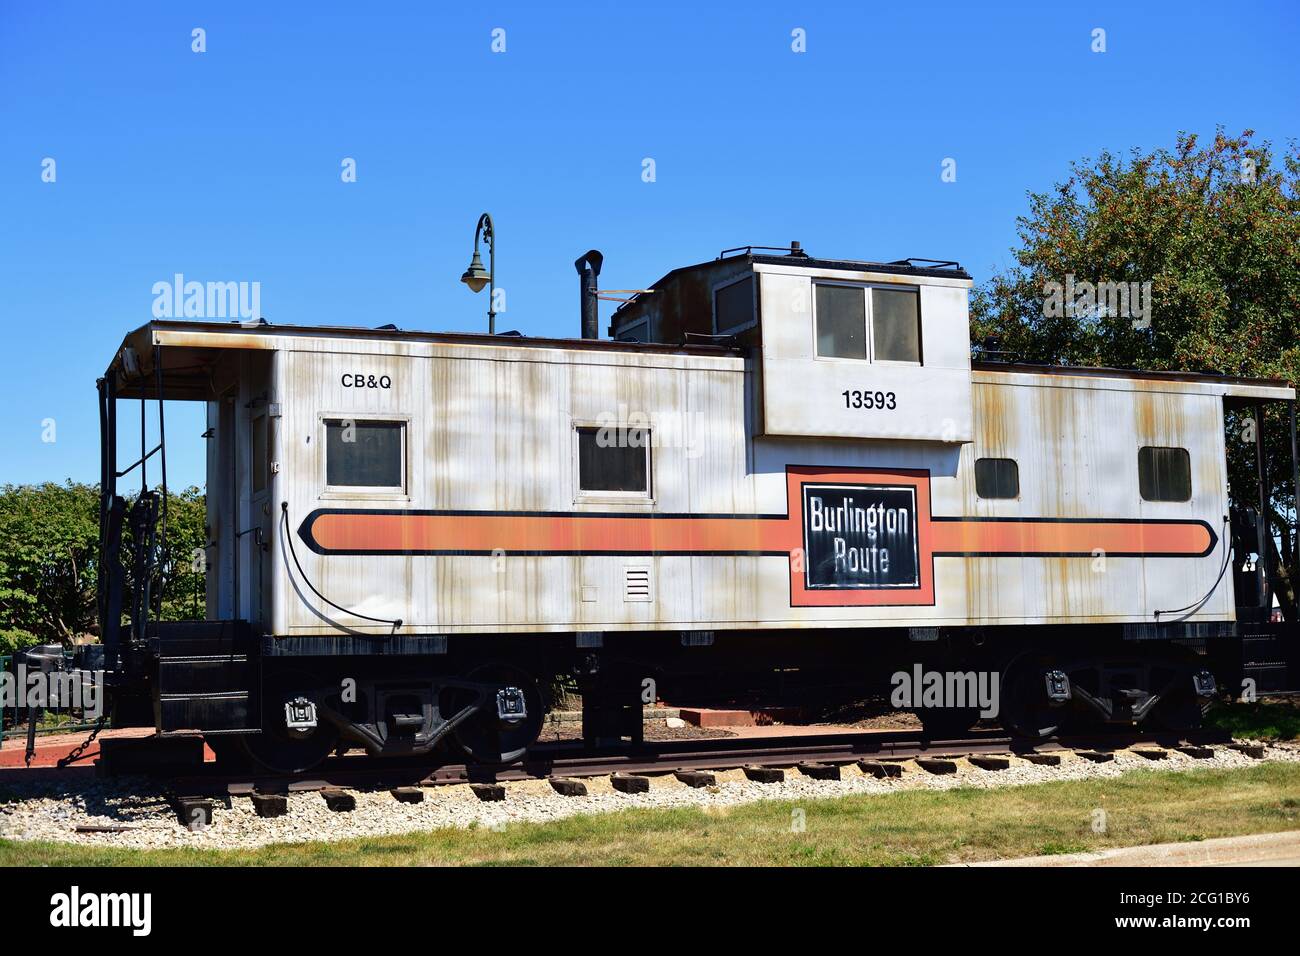 Princeton, Illinois, USA. An old Chicago Burlington & Quincy Railroad caboose or way car preserved on the grounds by the Amtrak depot in Princeton. Stock Photo